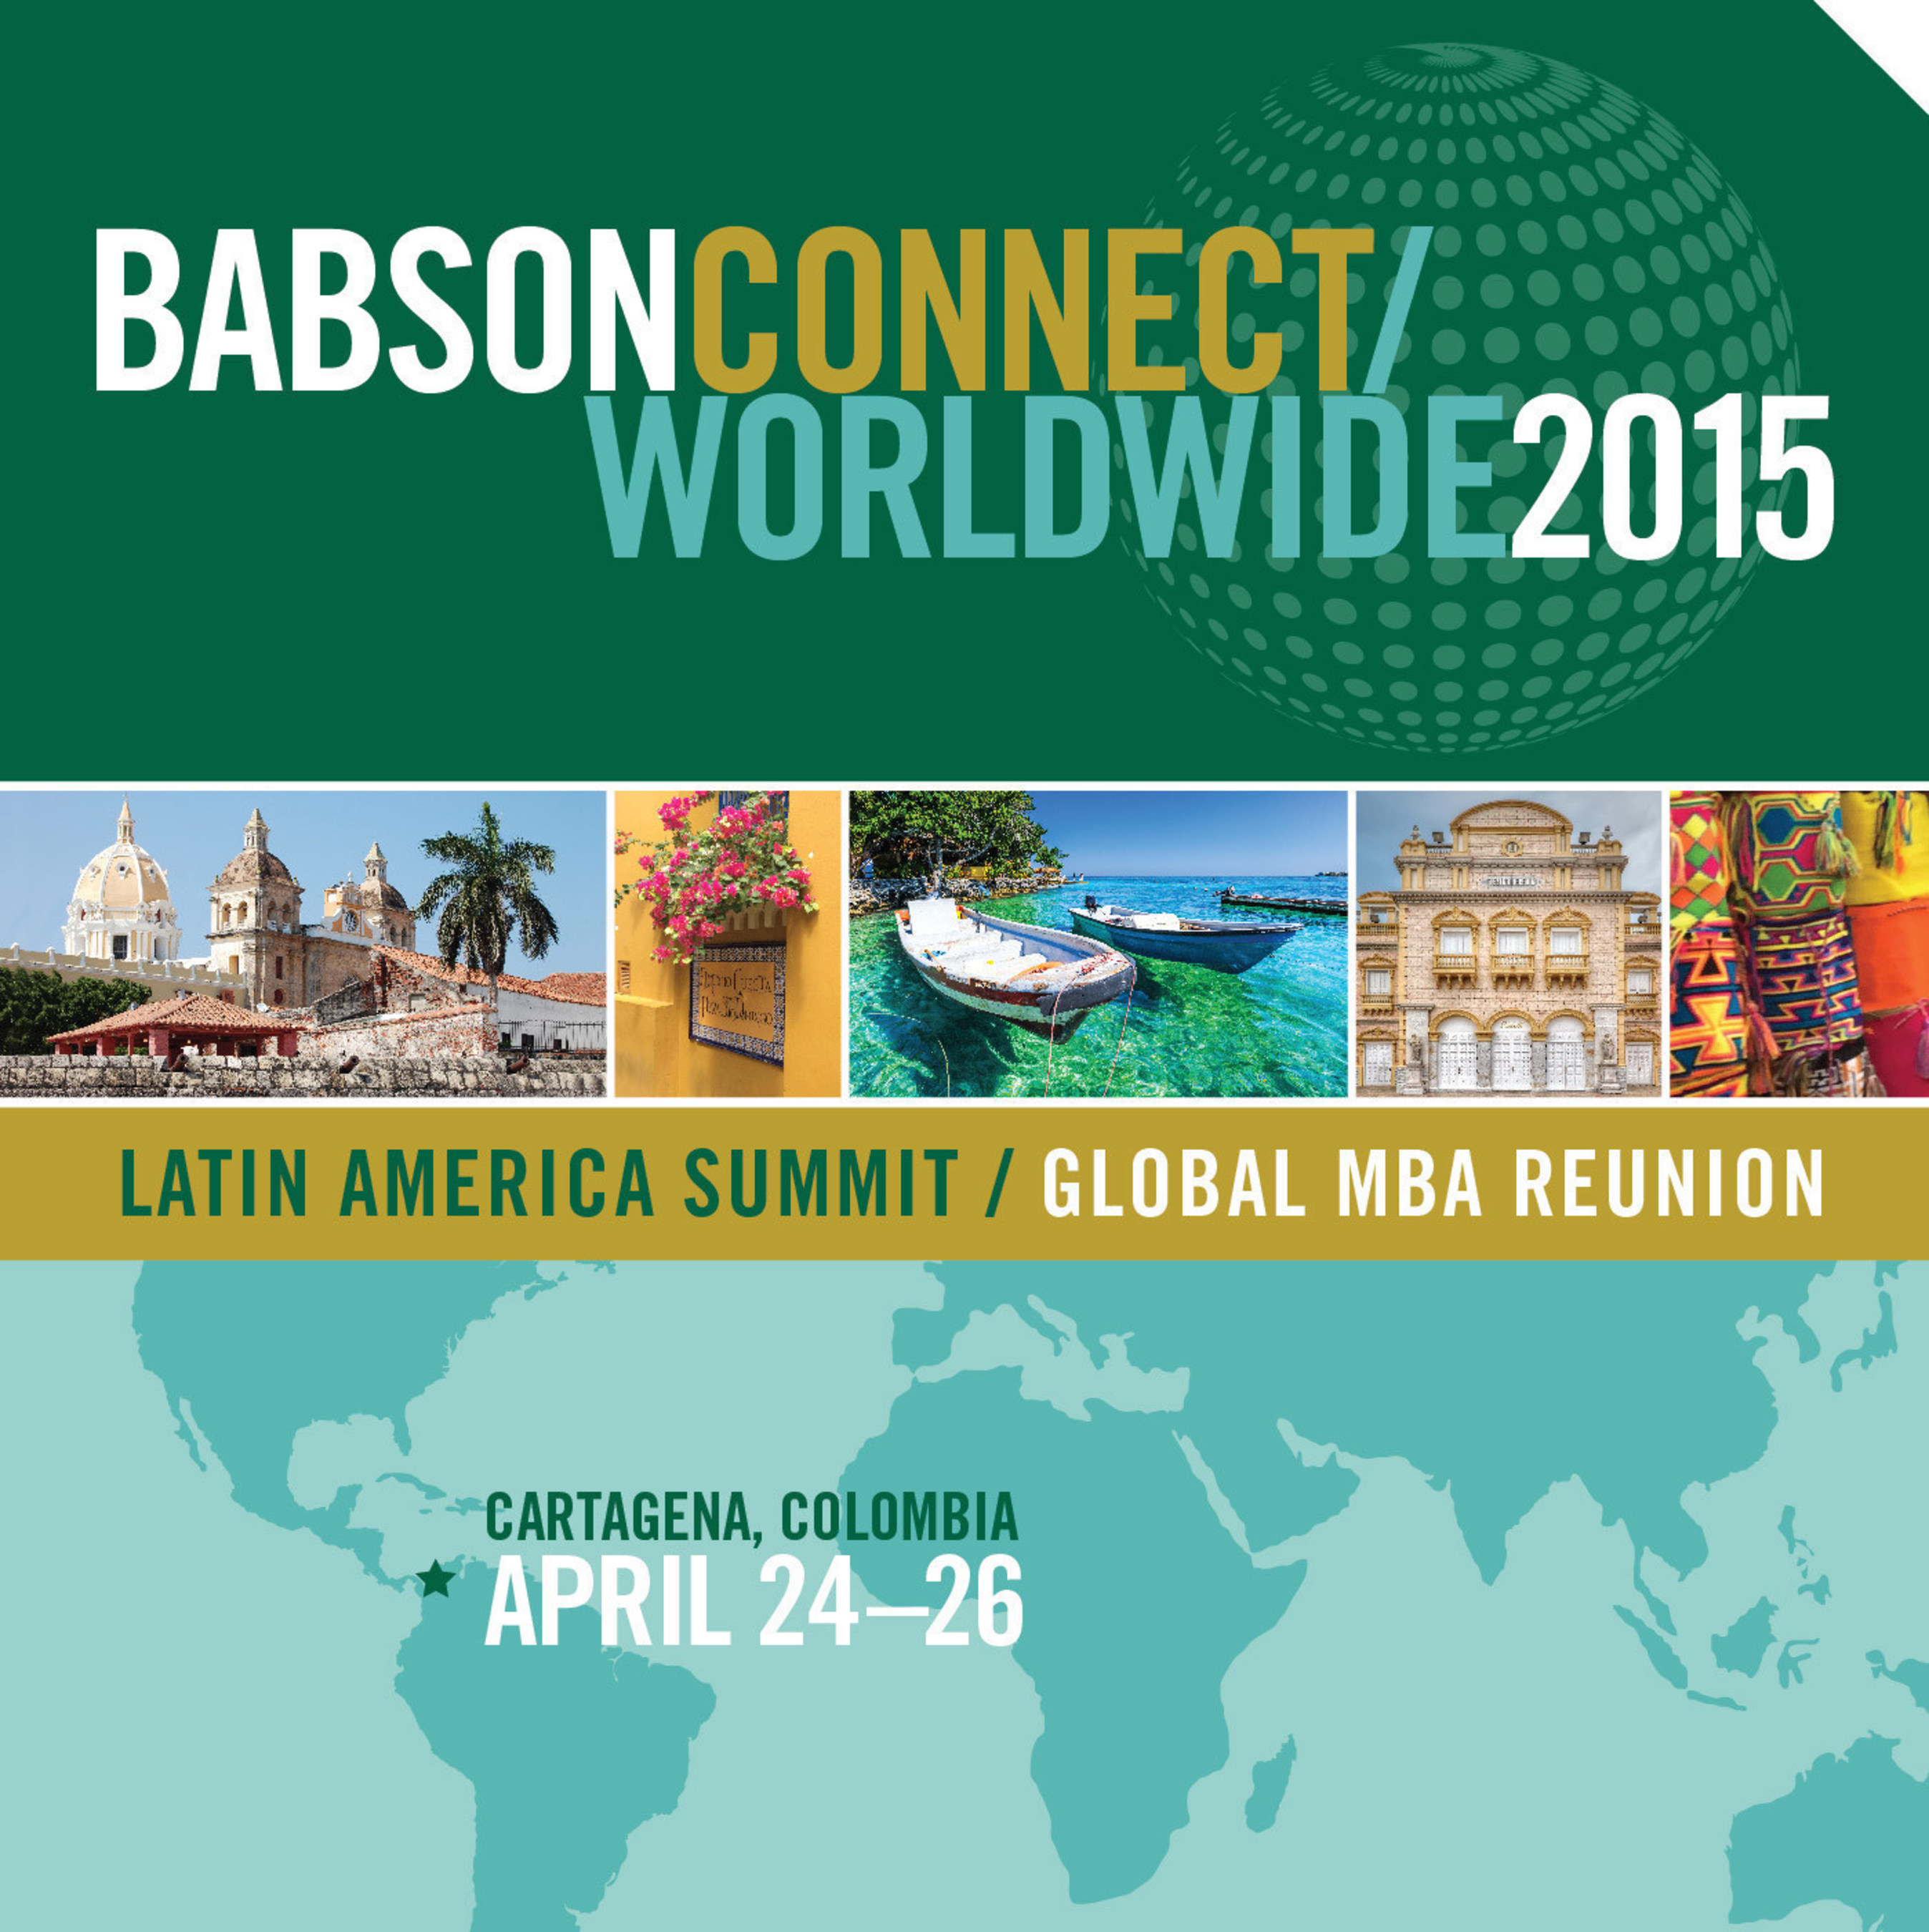 Babson College is hosting its inaugural Latin America Summit / Global Master of Business Administration Reunion -- Babson Connect: Worldwide -- an unprecedented opportunity for the global Babson community to gather and celebrate Entrepreneurship of All Kinds(R).   This global gathering is taking place April 24-26, 2015 in historic Cartagena, Colombia, a celebrated World Heritage city.